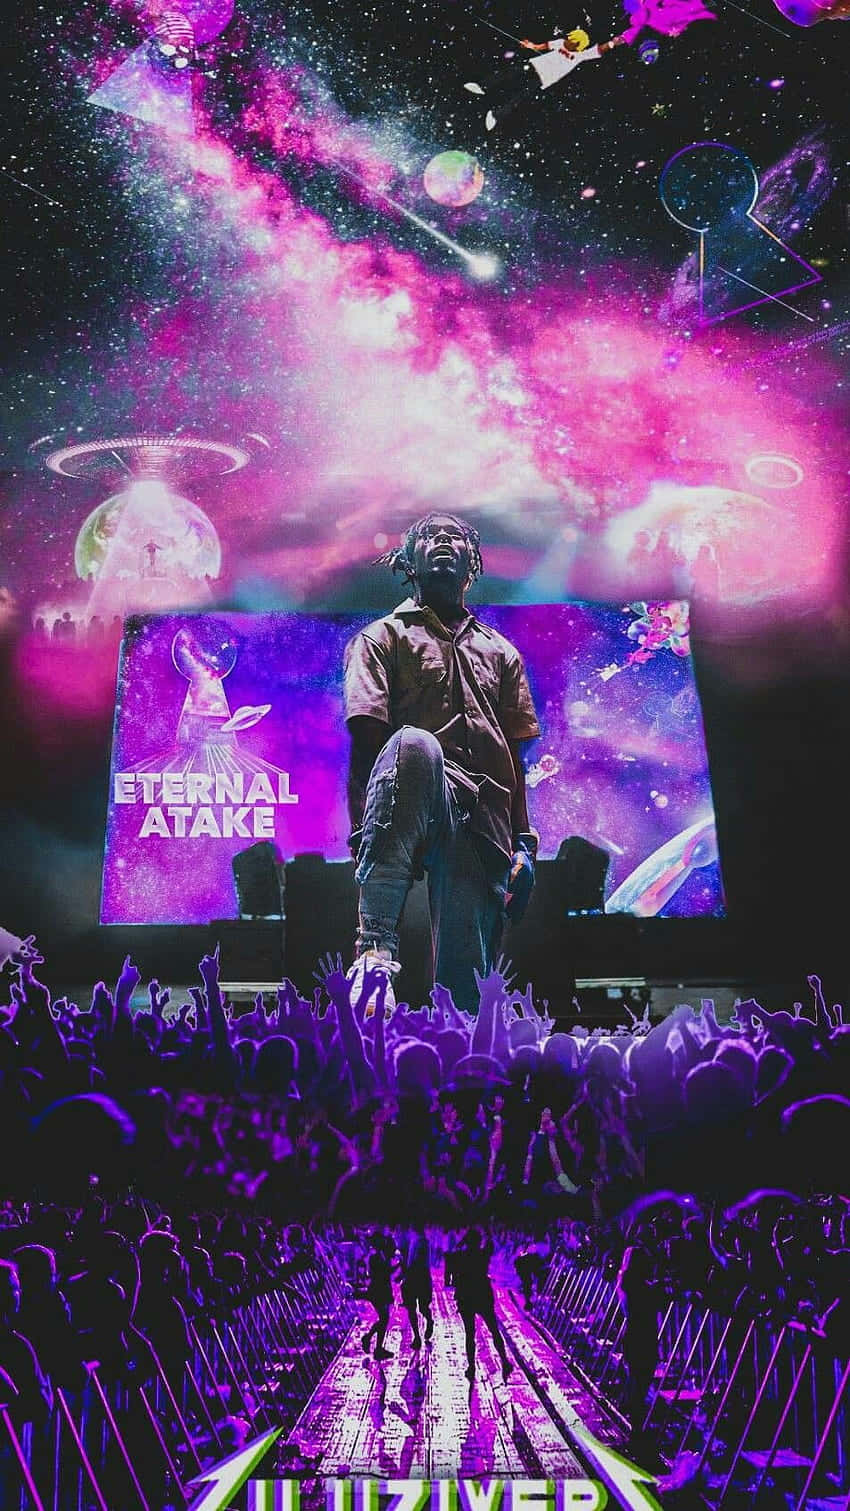 All Eyes On Me - The Highly Anticipated Release of Lil Uzi's Album Wallpaper